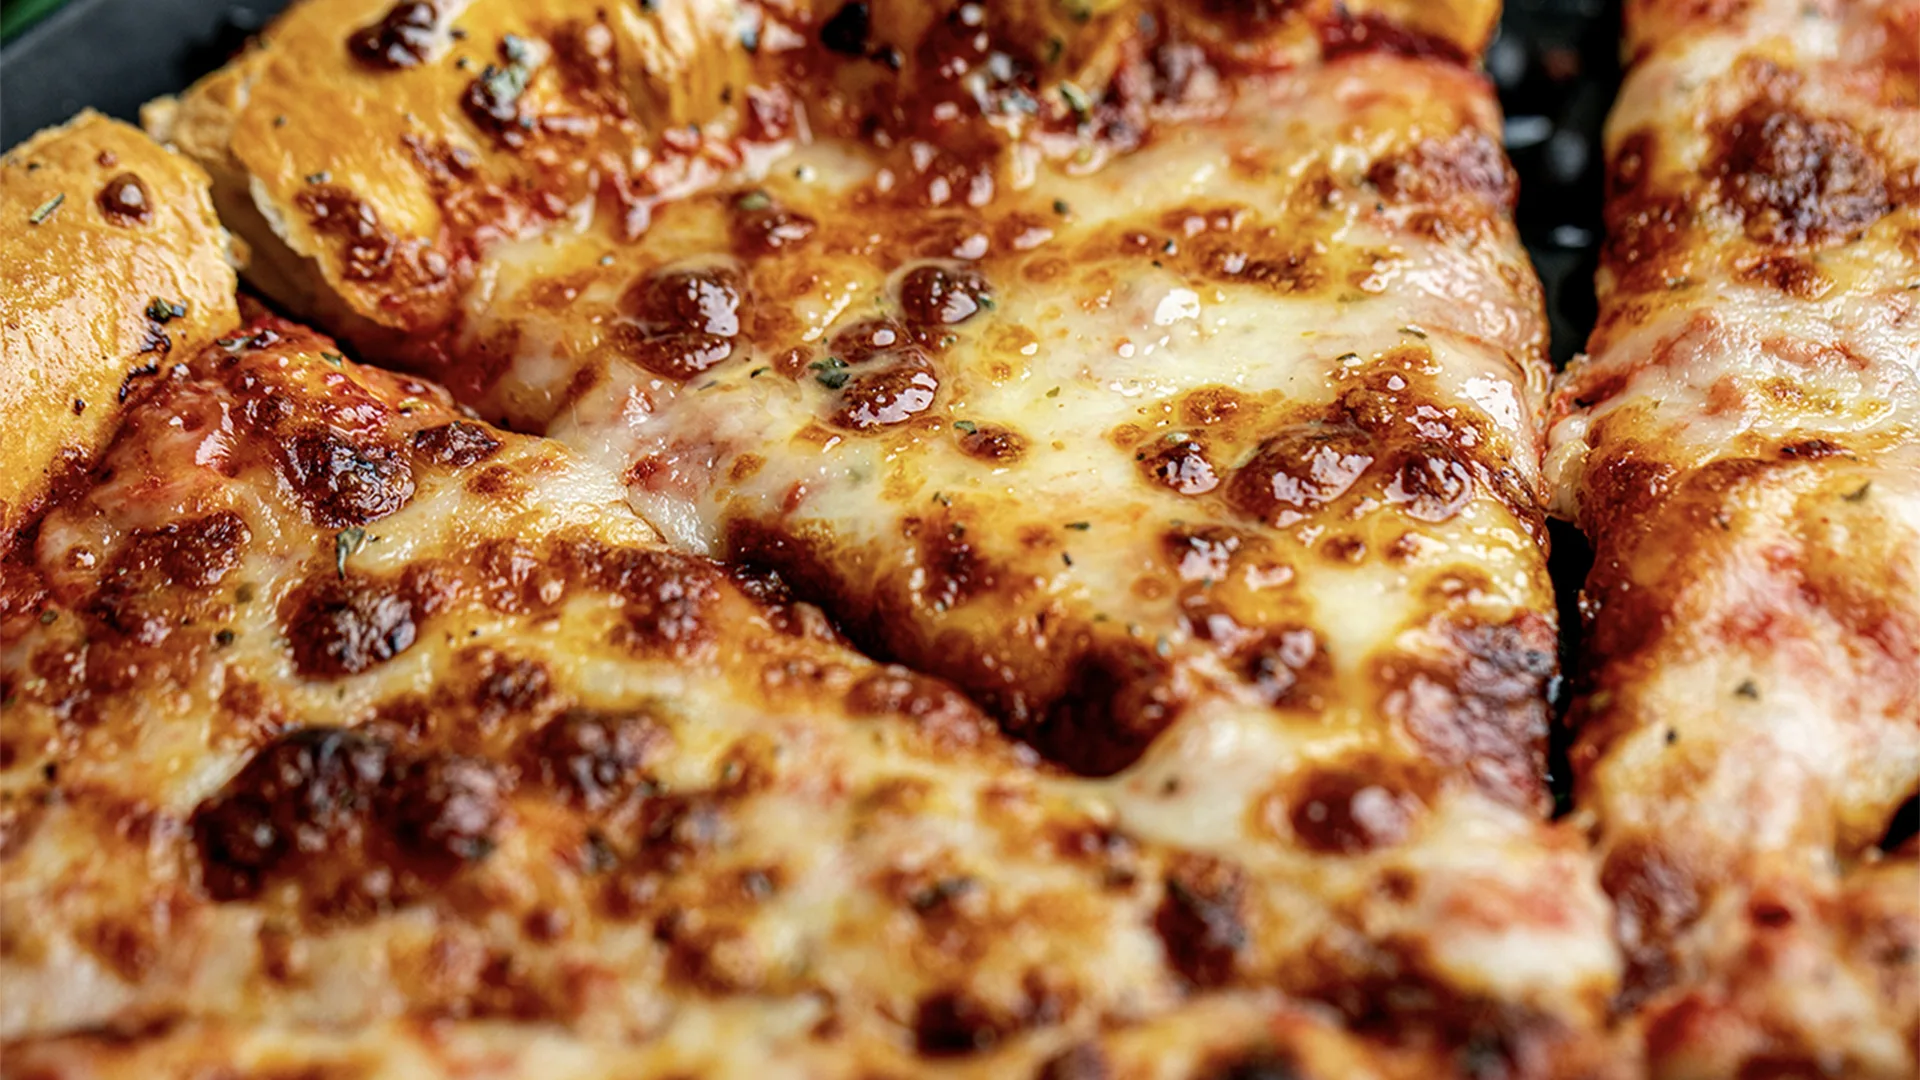 A close up of a cheesy pizza